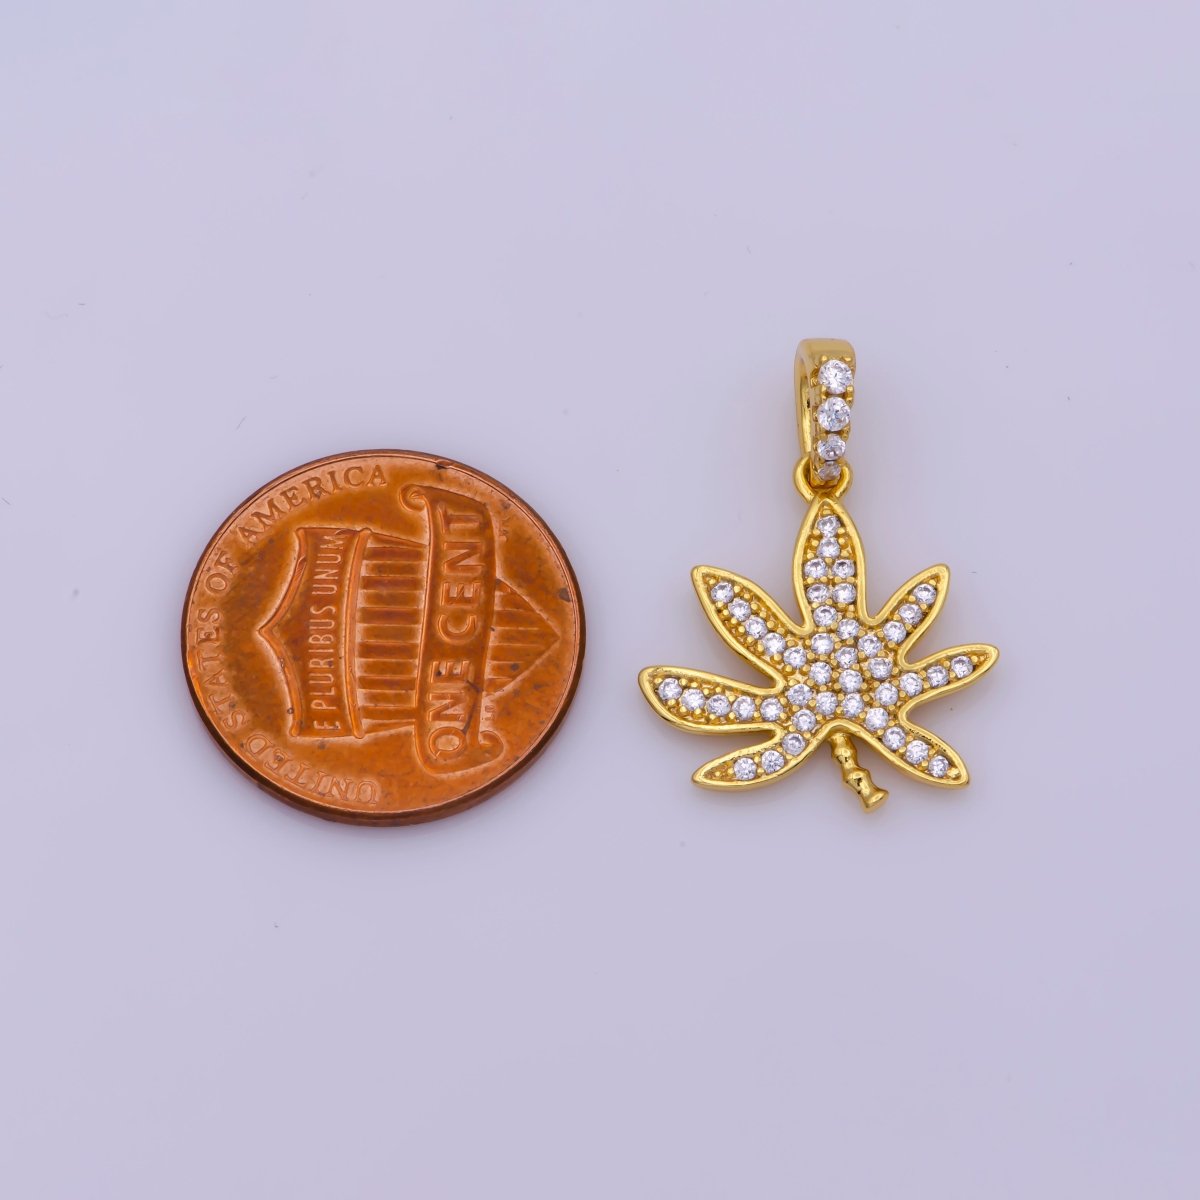 24K Gold Filled Mary Jane Pendant Micro Pave Leaf 420 Charm Jewelry Supply N-1448 - DLUXCA